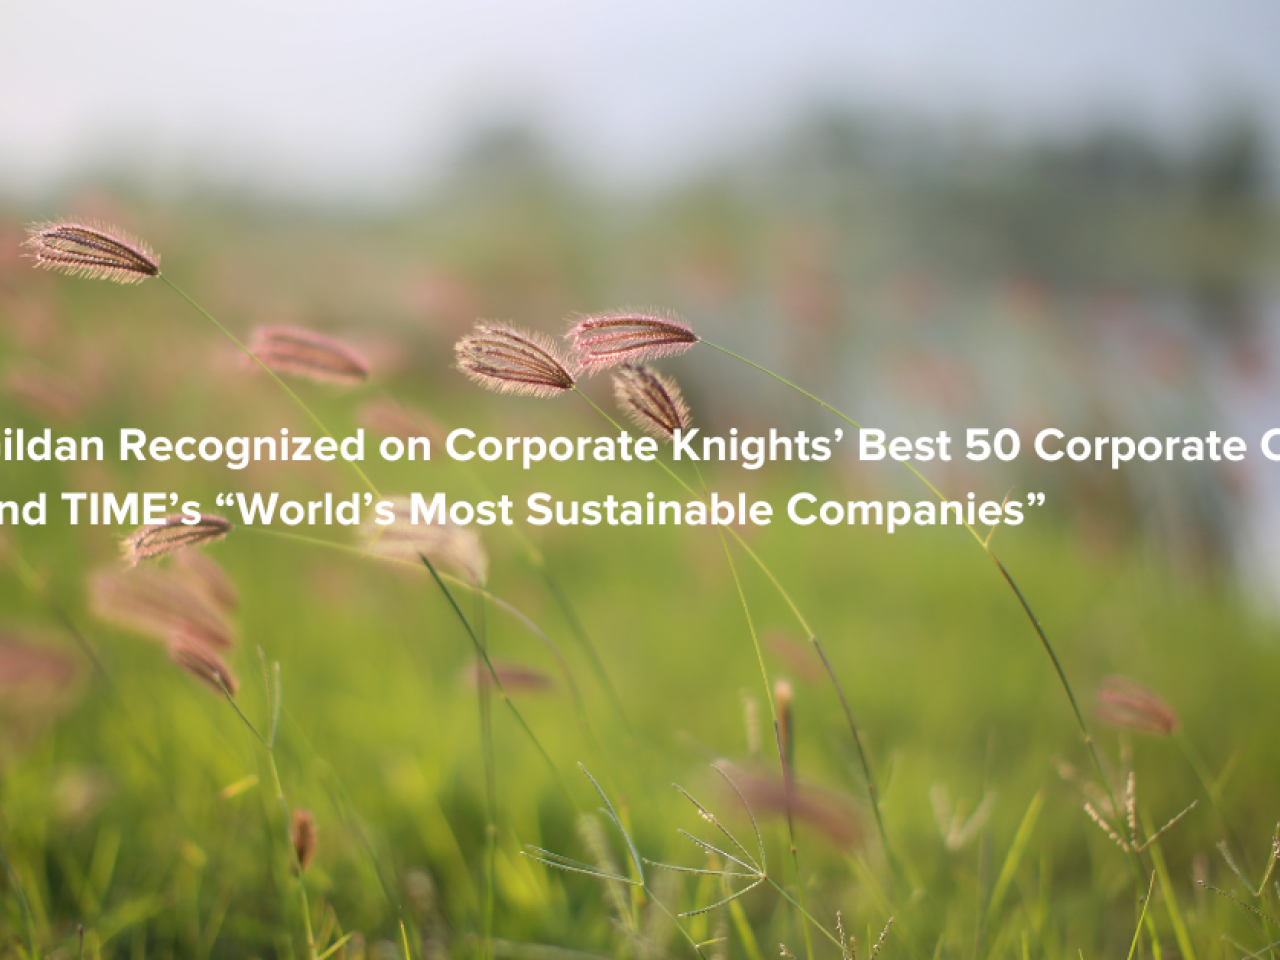 "Gildan Recognized on Corporate Knights’ Best 50 Corporate Citizens and TIME’s World’s Most Sustainable Companies" written on a backdrop of a close-up shot of grass and weeds